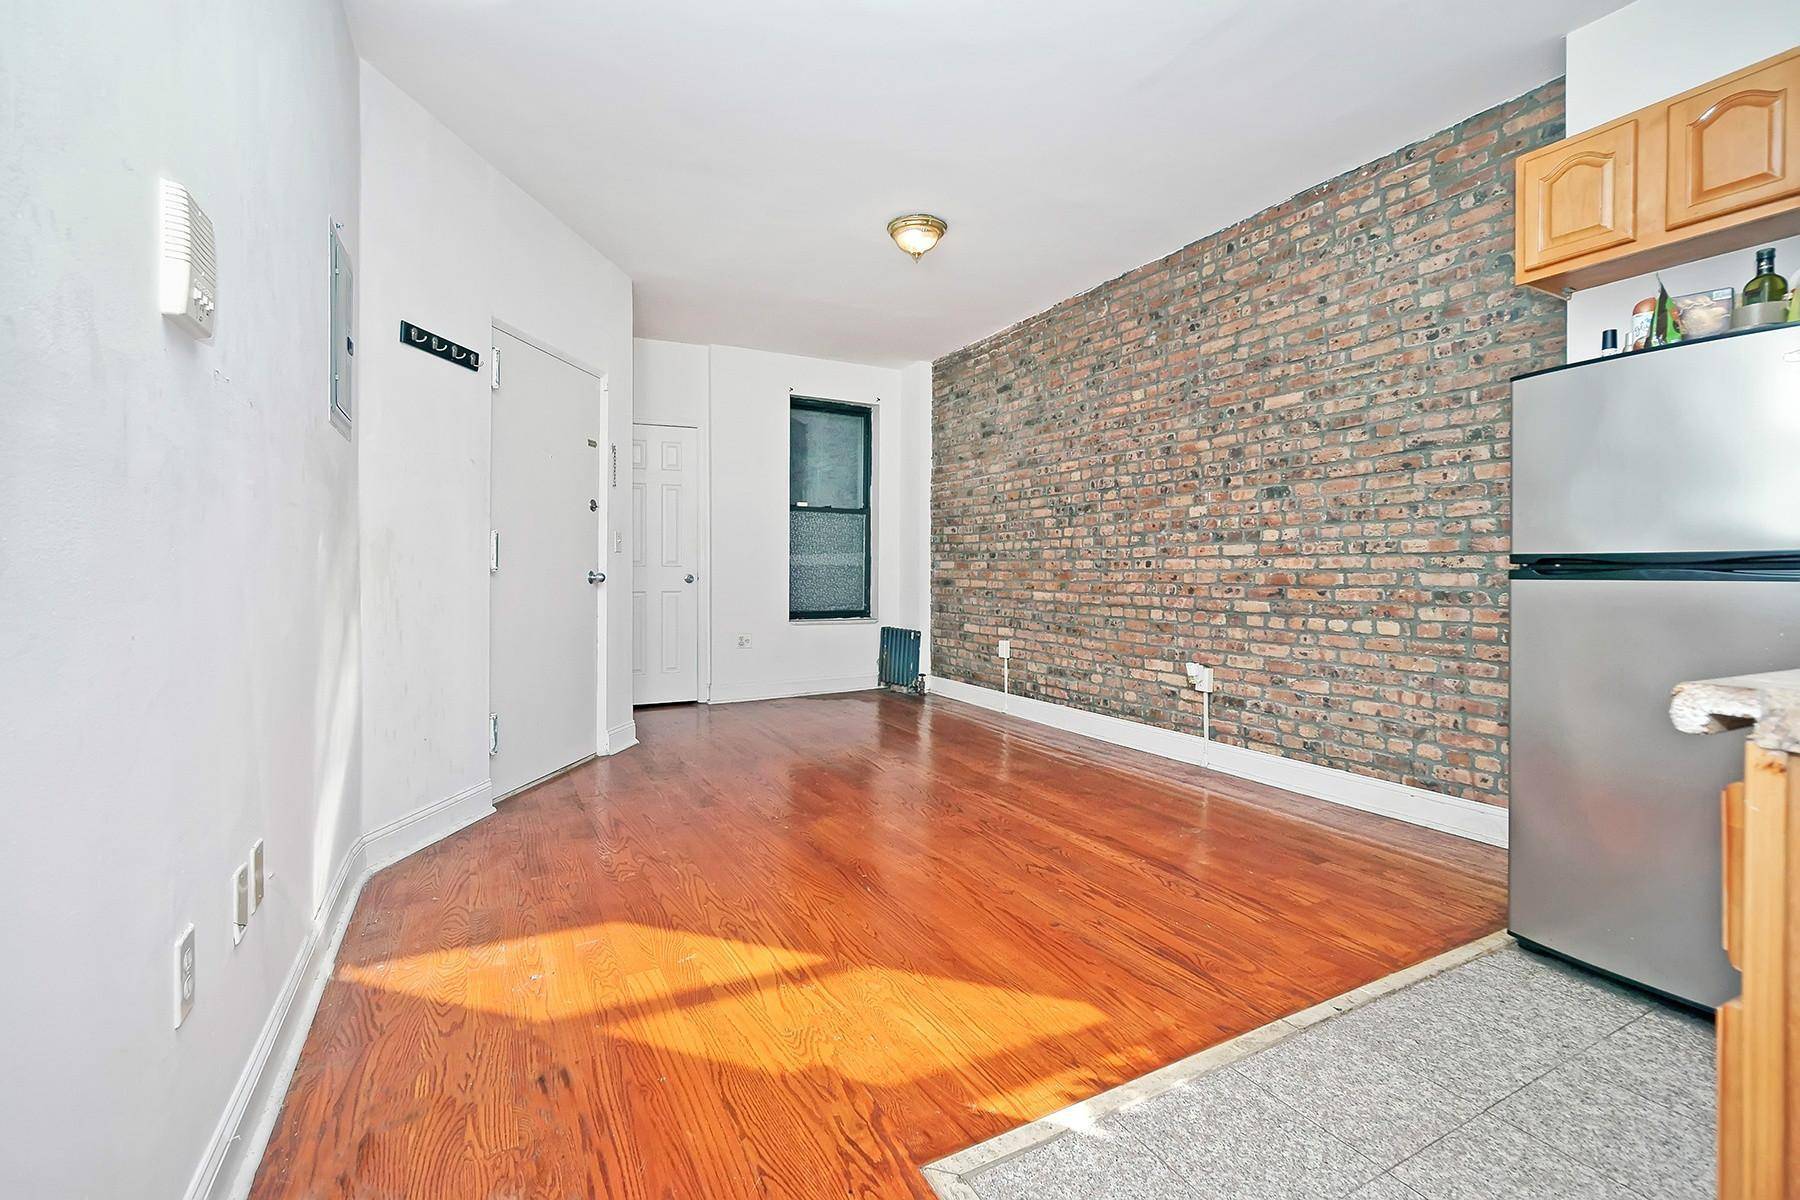 Very large 1 bedroom with exposed brick walls below 125th Street in the Heart of South Harlem.